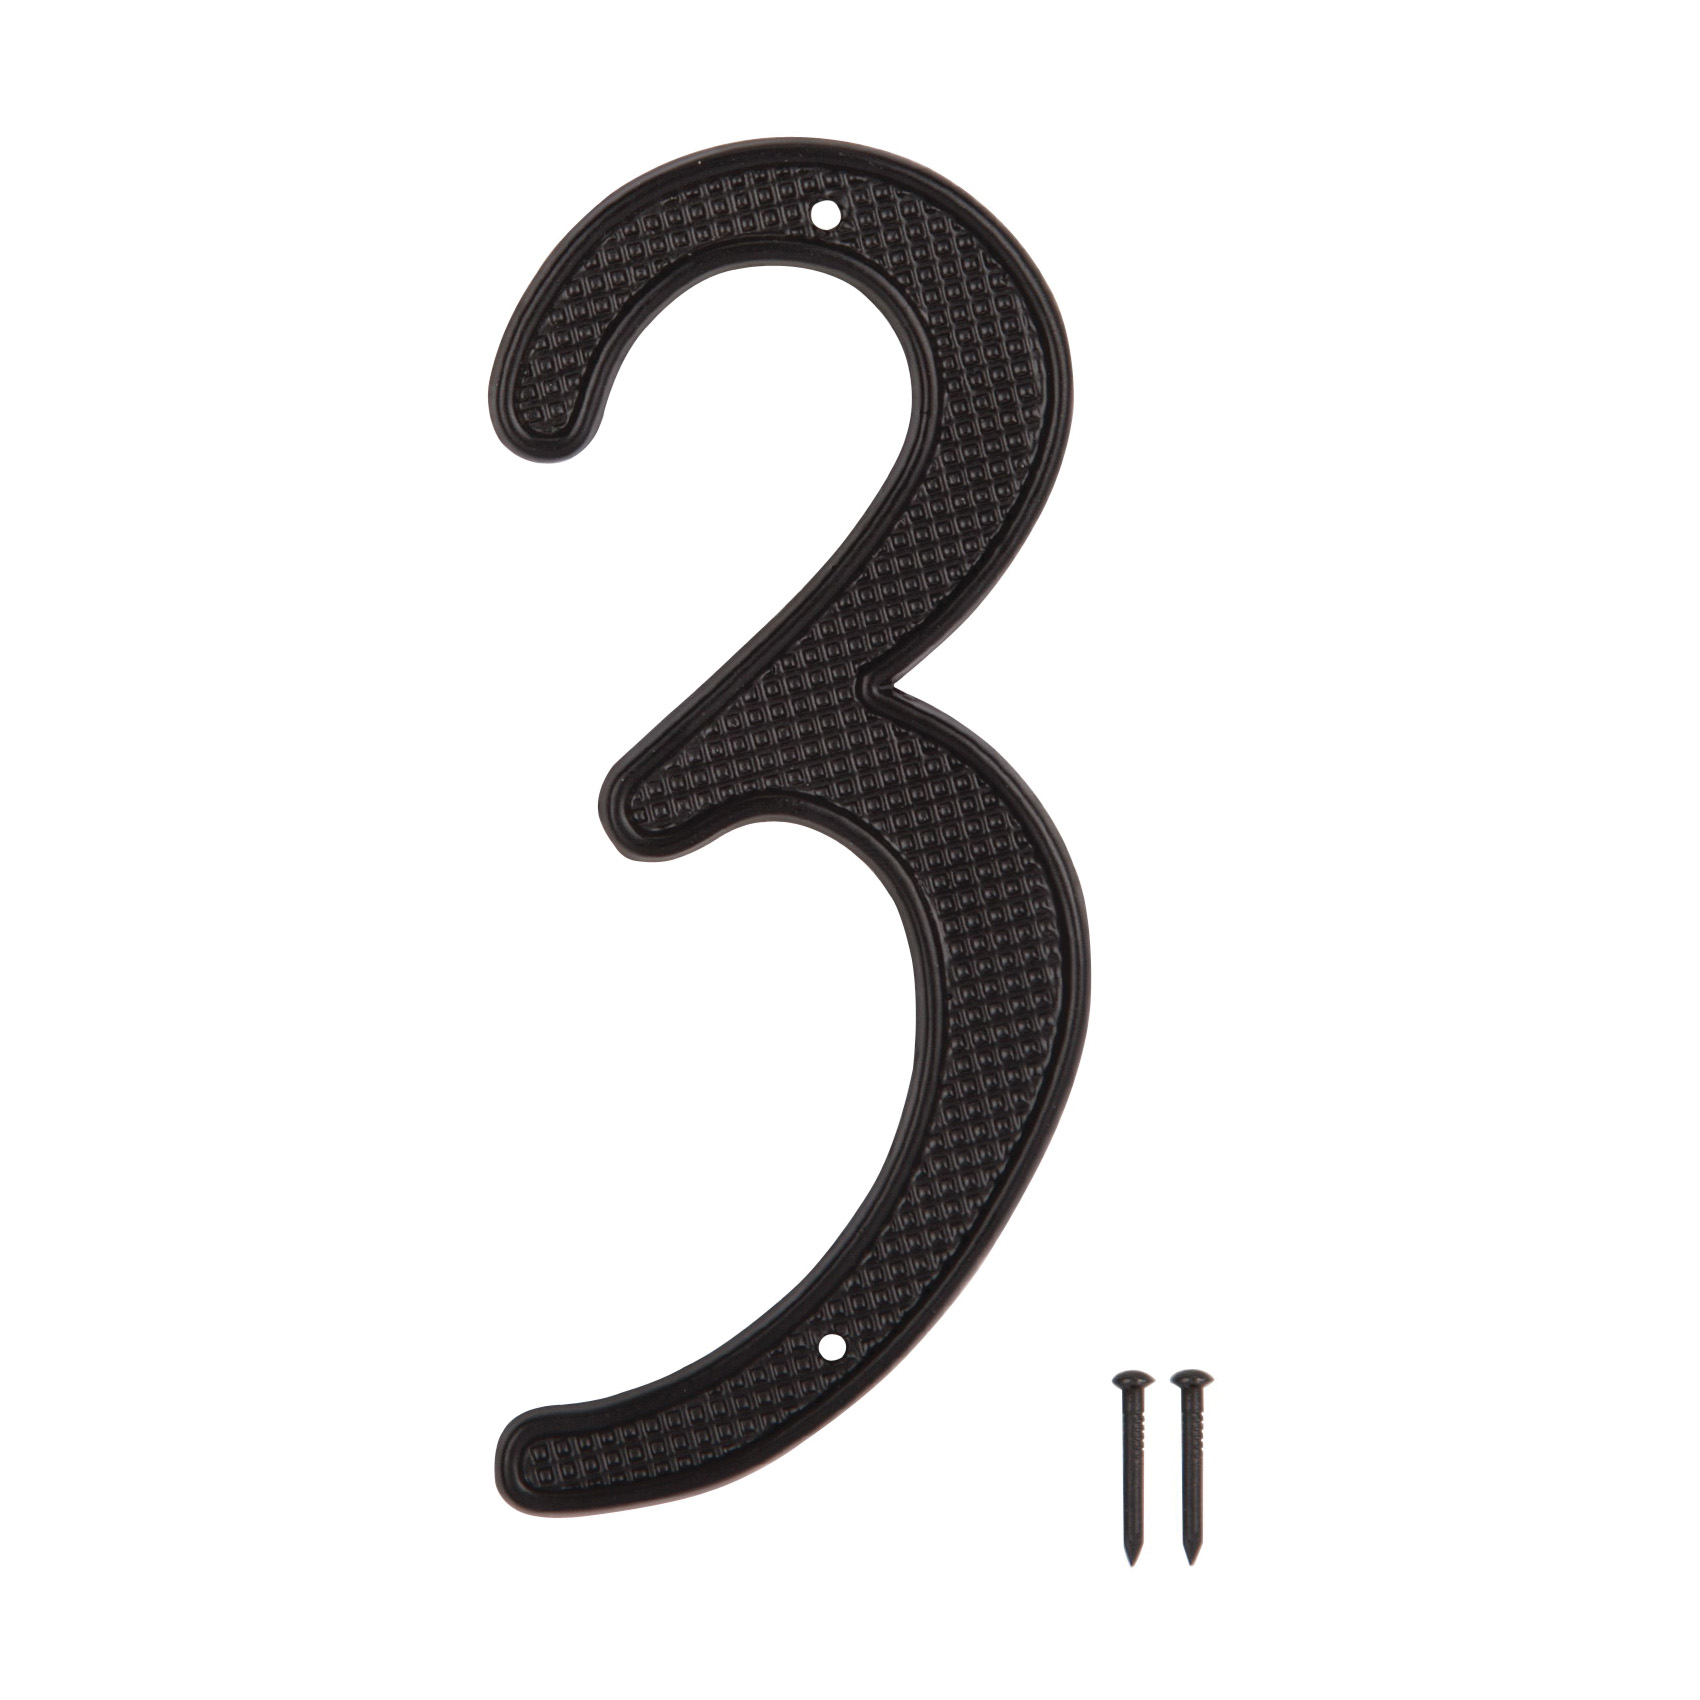 N-013-PS House Number, Character: 3, 4 in H Character, 2.36 in W Character